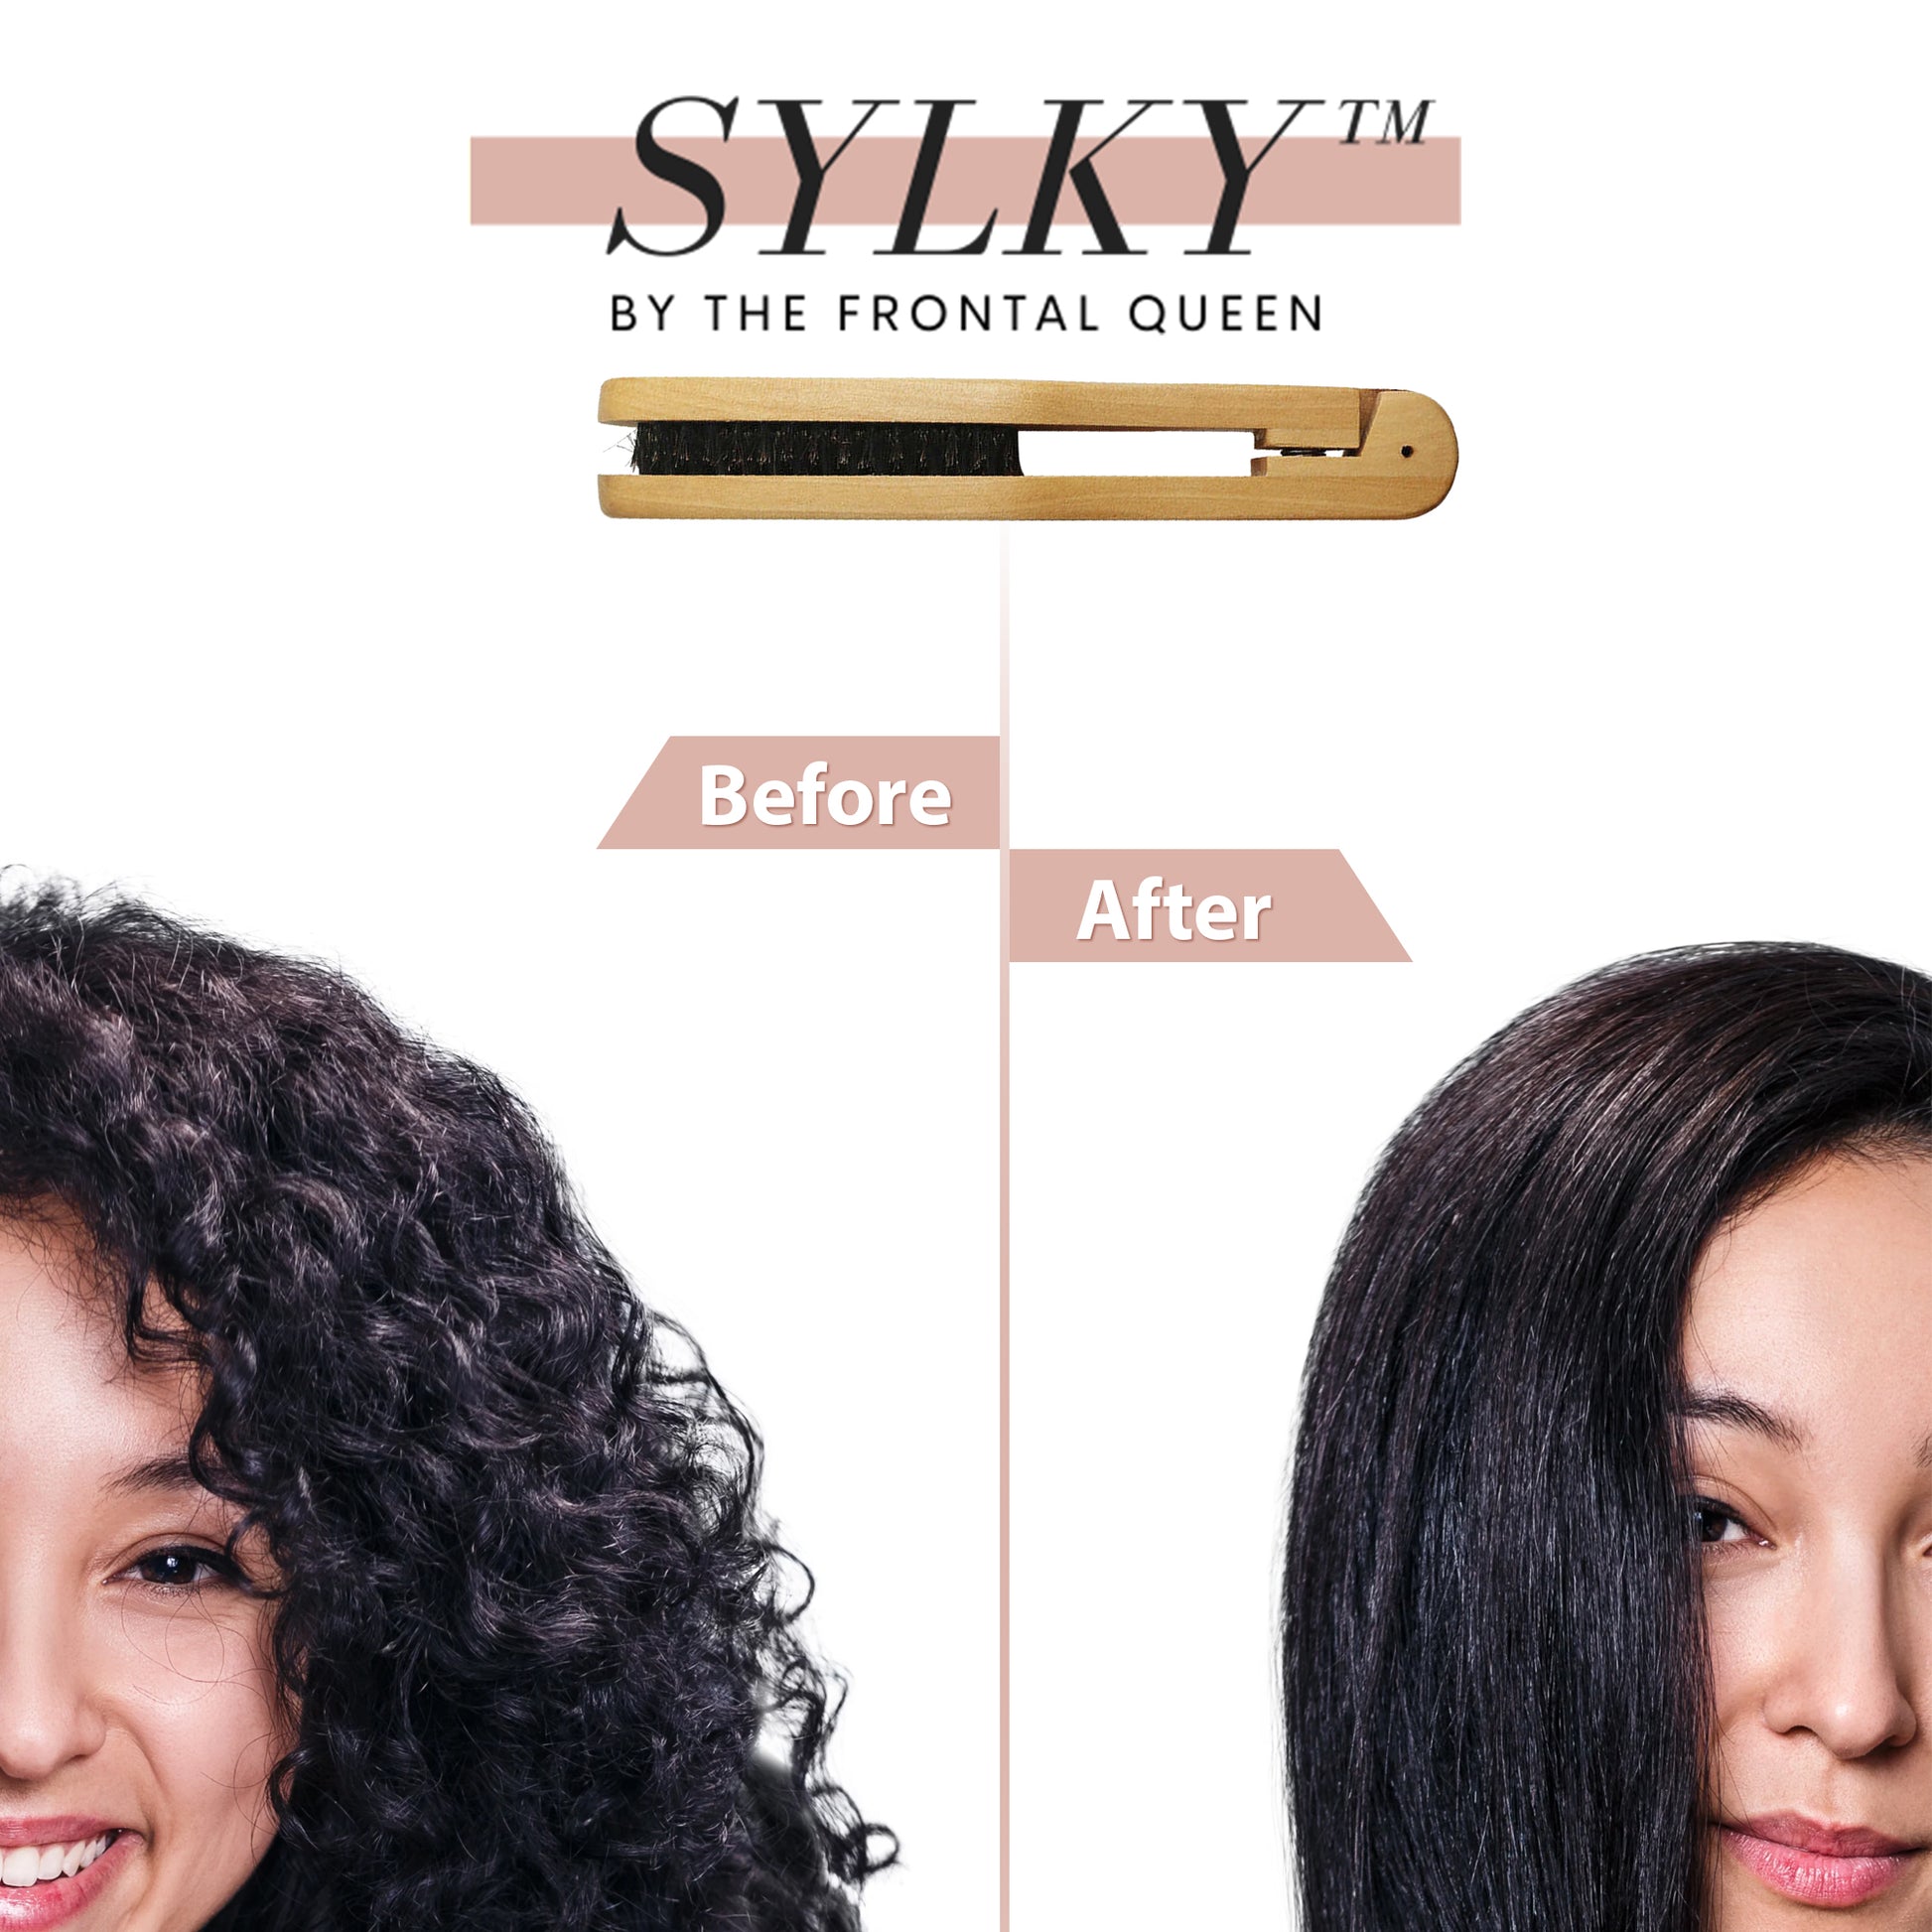 SYLKY™ FLAT IRON BRUSH by The Frontal Queen - The Frontal Queen